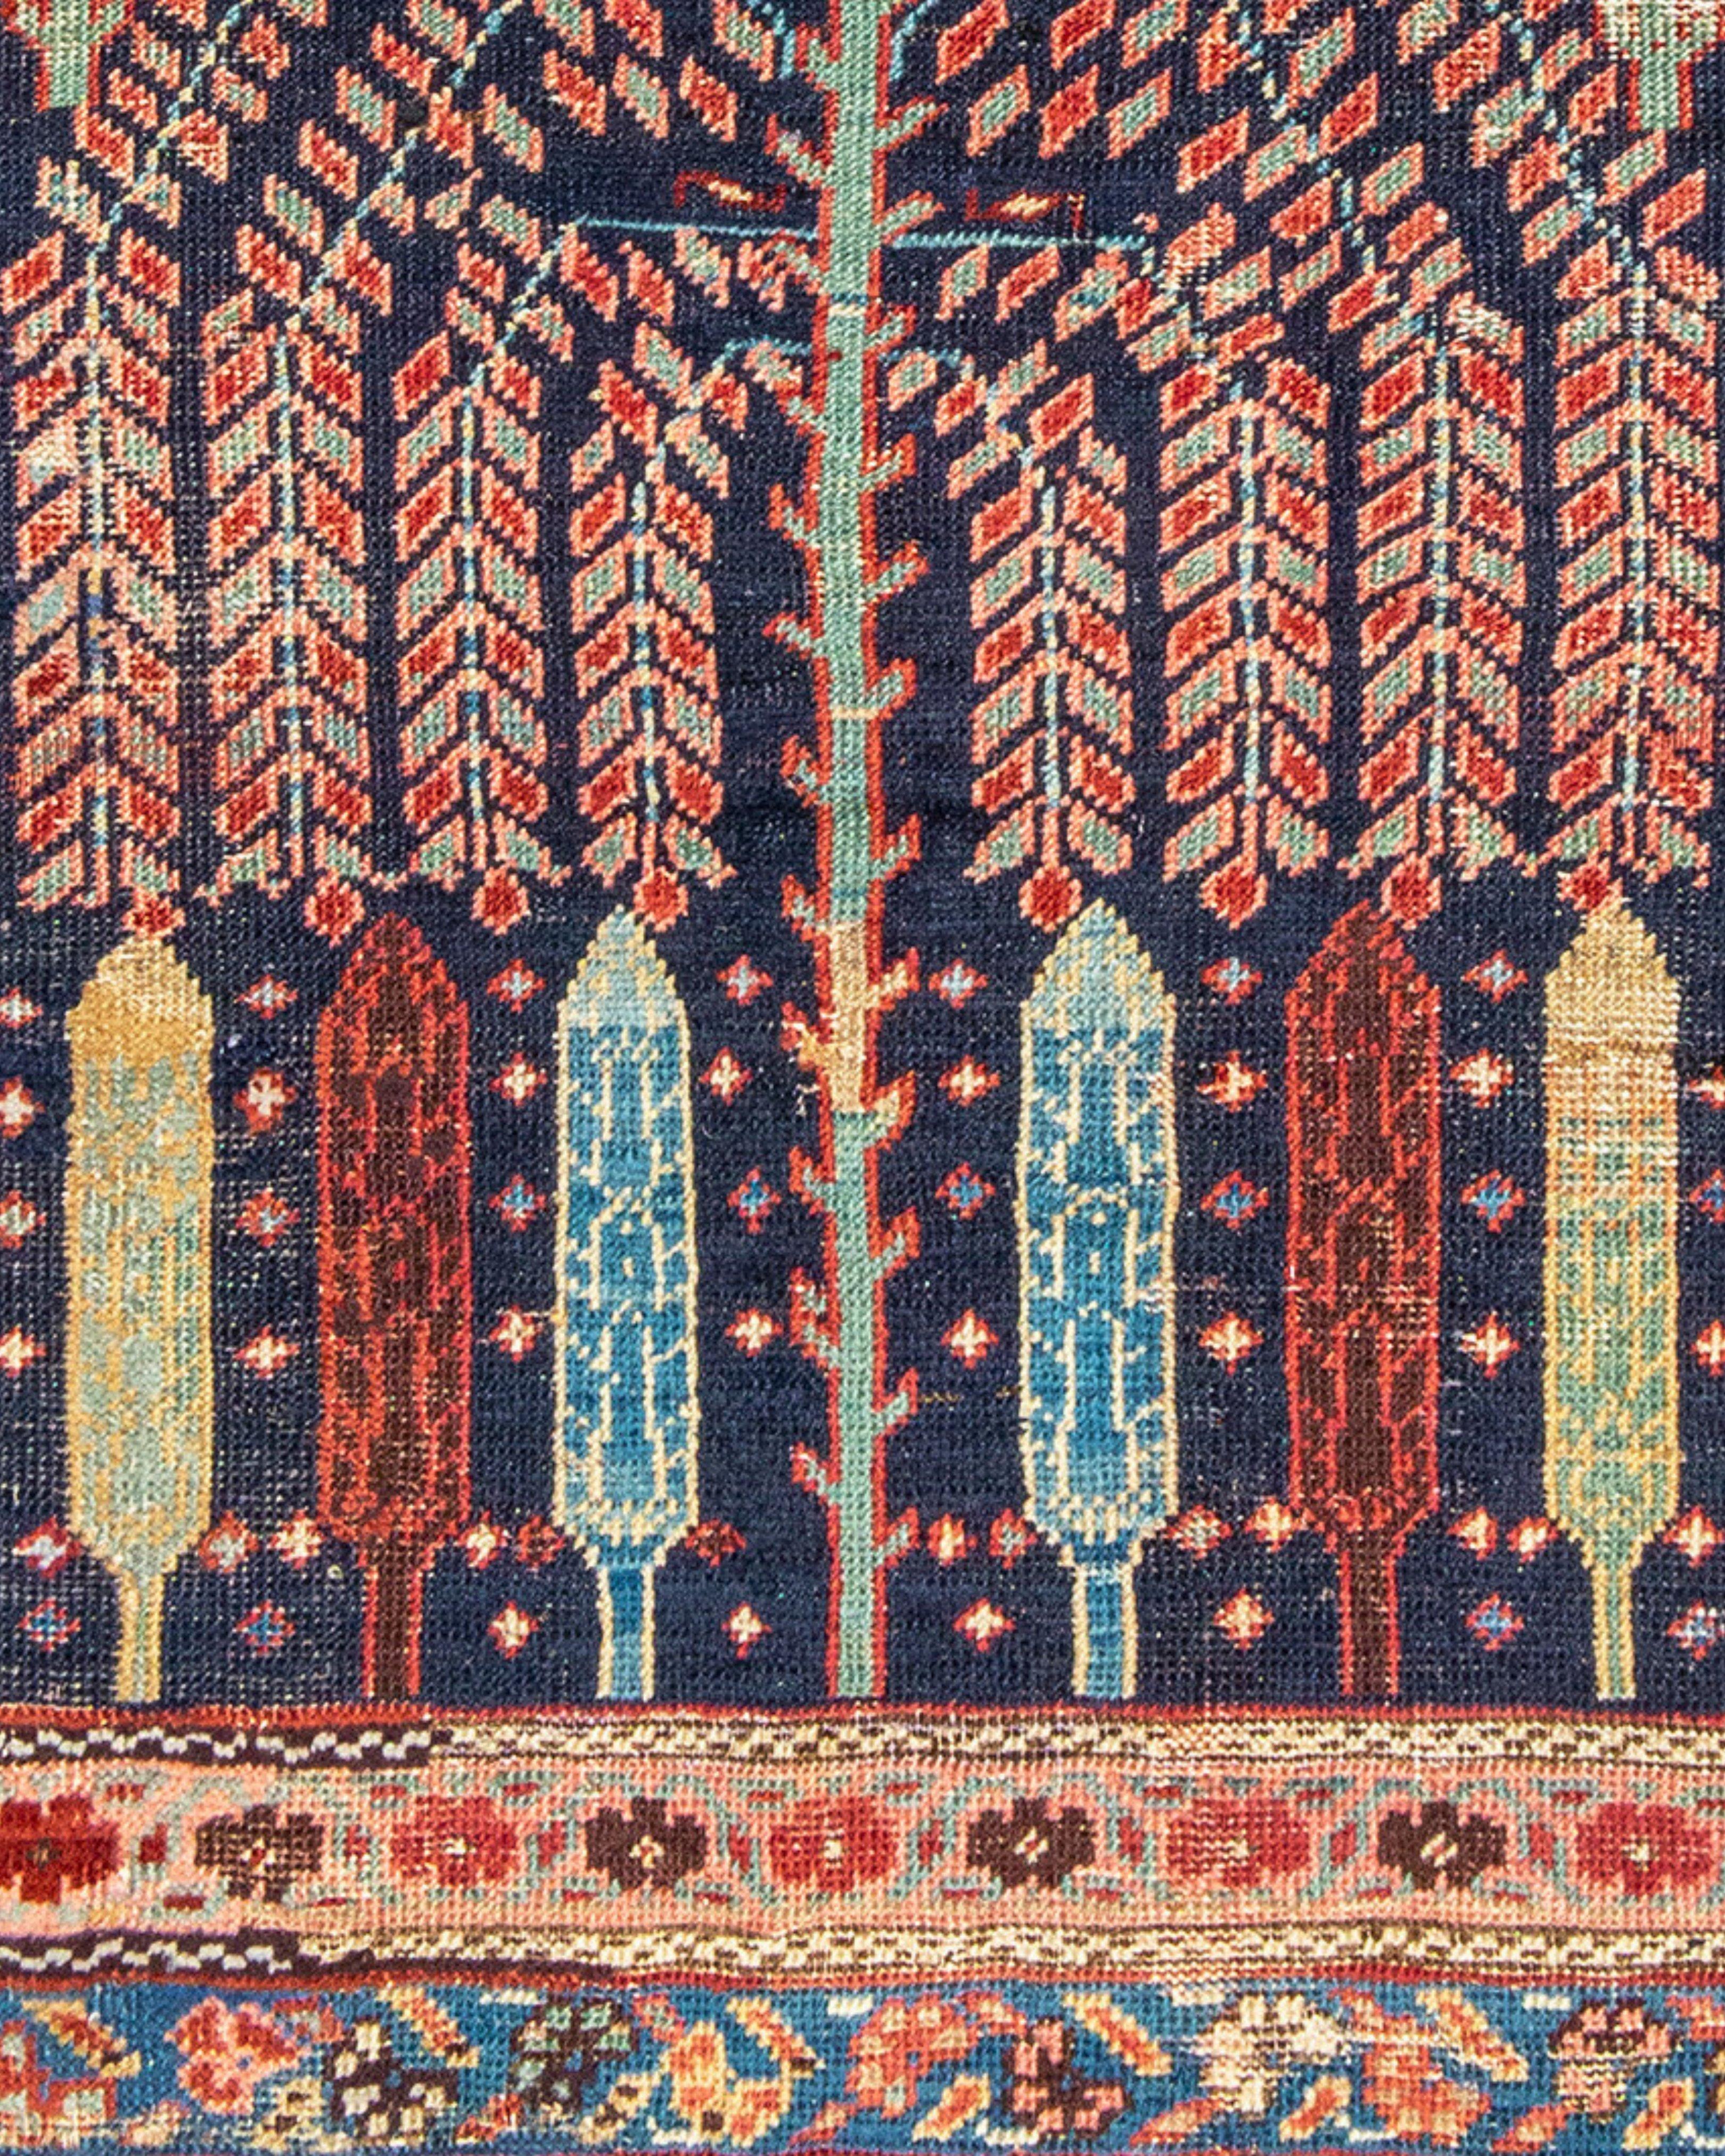 Antique Persian Bakshaish Prayer Rug, Mid-19th Century

The Collection of Dr. Charles Whitfield. A true collector’s piece.

Additional Information:
Dimensions: 3'2